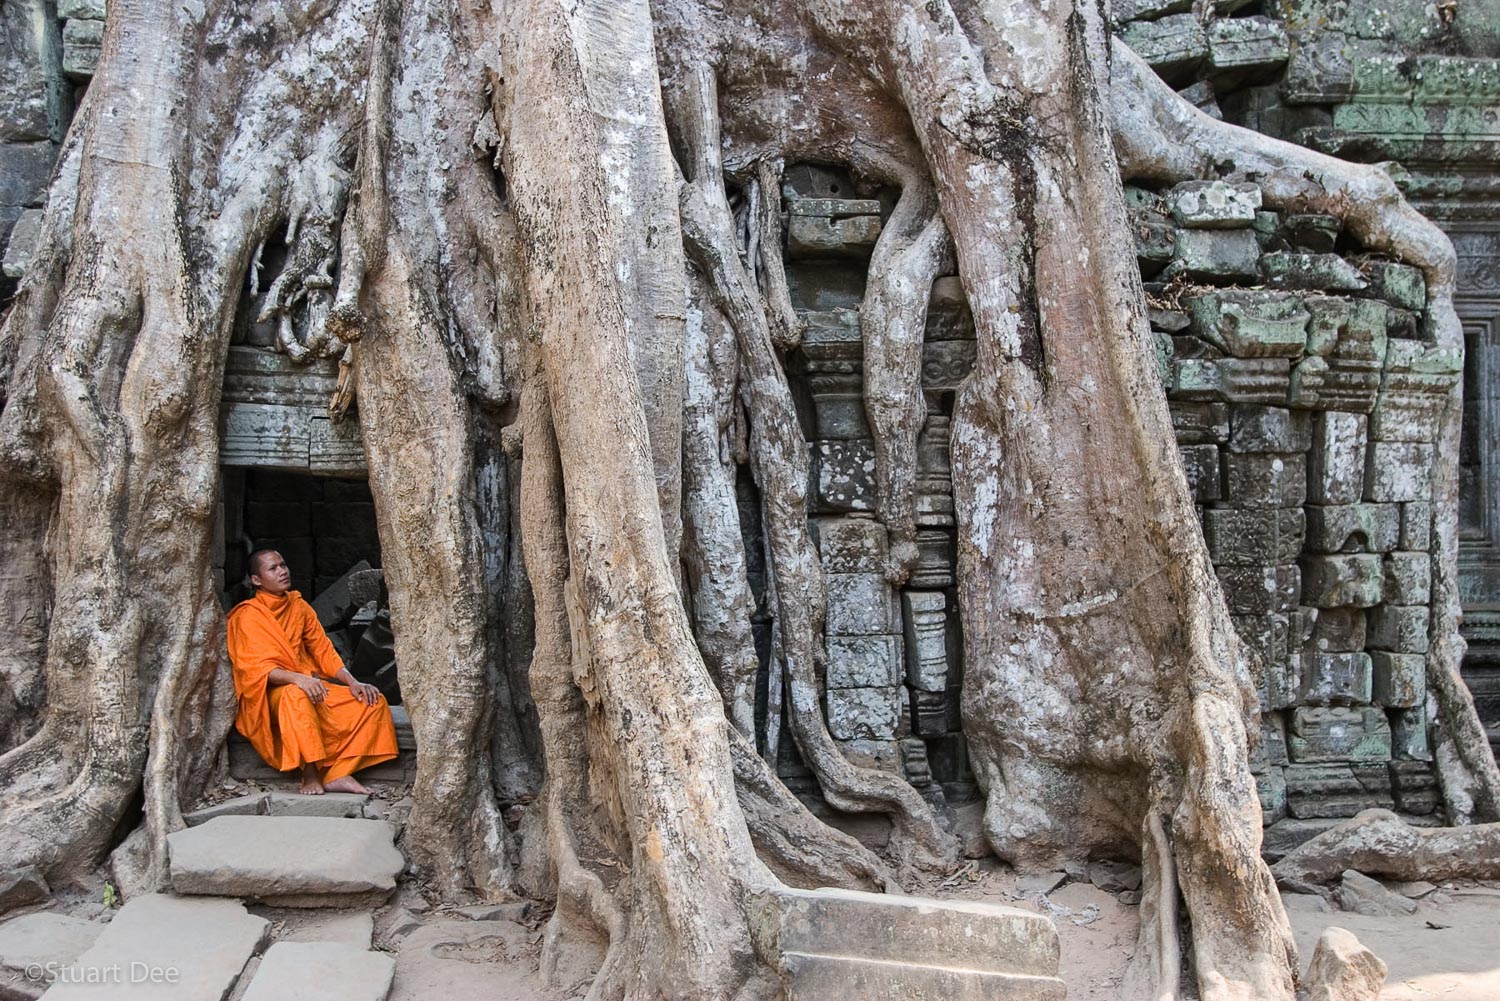  Monk meditating, under large tree growing over temples, Ta Prohm, Angkor Wat, Cambodia 